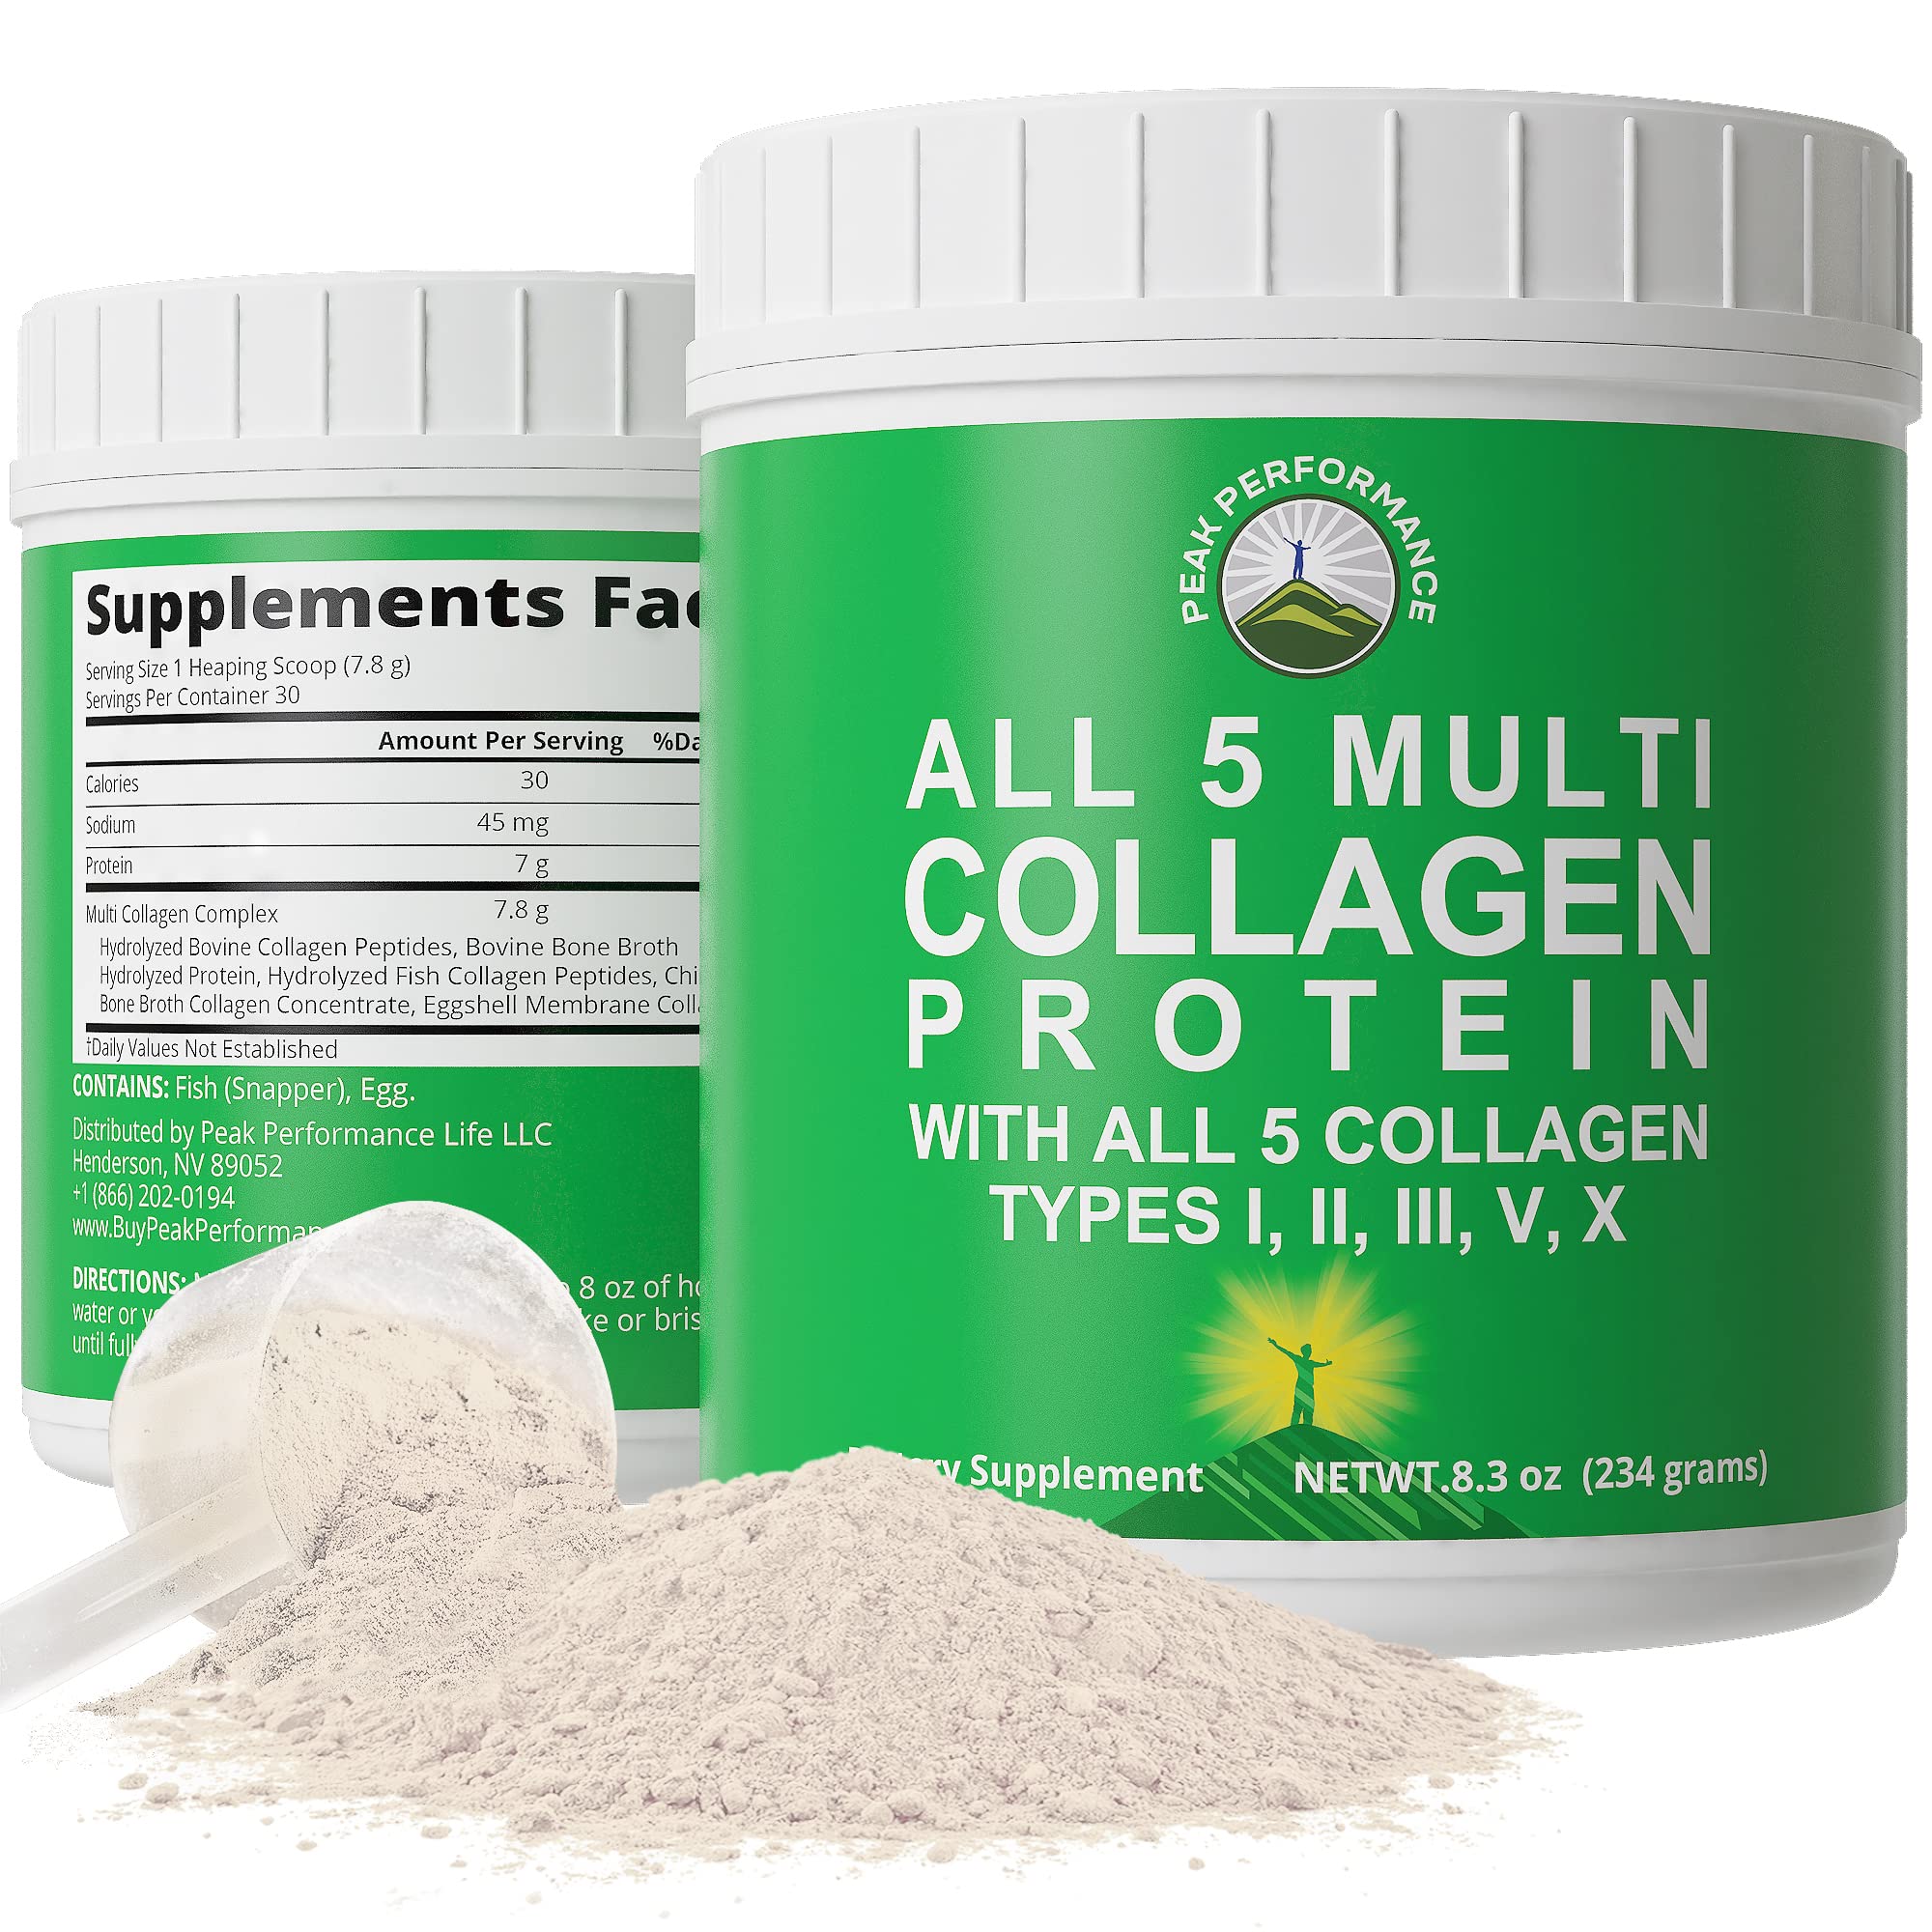 Book Cover All 5 Multi-Collagen Protein Powder Peptides by Peak Performance. Multi-Collagen Contains All Types I, II, III,V, X. Keto, Paleo Friendly with Hydrolyzed Bovine, Marine, Chicken, Bone Broth Collagens Unflavored